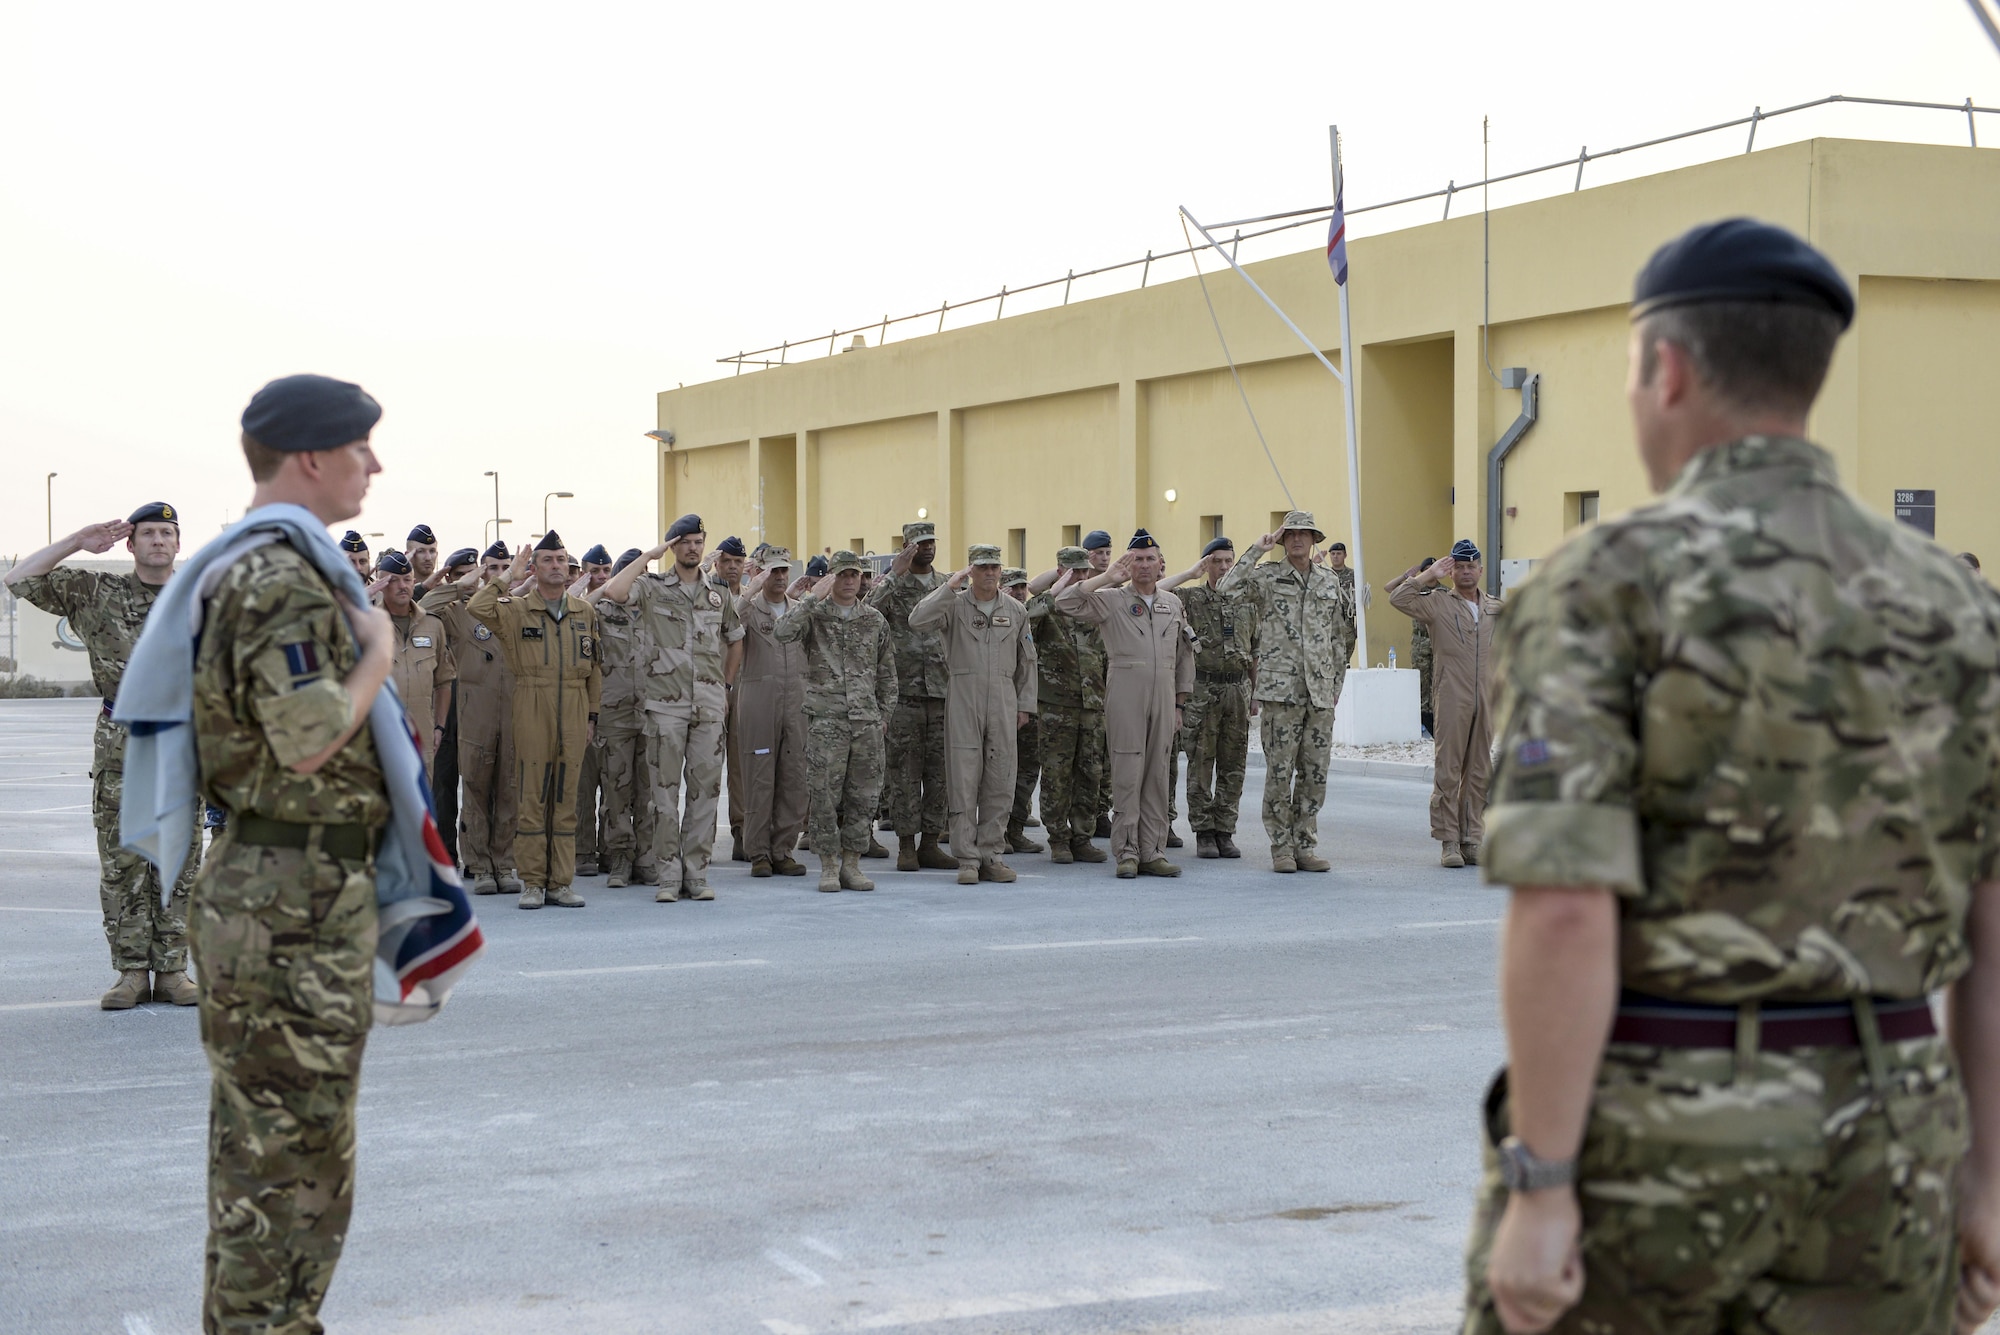 United Kingdom Air Component Commander and Air Officer Commanding 83 Expeditionary Air Group, Air Commodore Johnny Stringer, right center, addresses UK forces along with various leaders from the coalition forces following the Battle of Britain commemoration ceremony at Al Udeid Air Base, Qatar, Sept. 16, 2017.